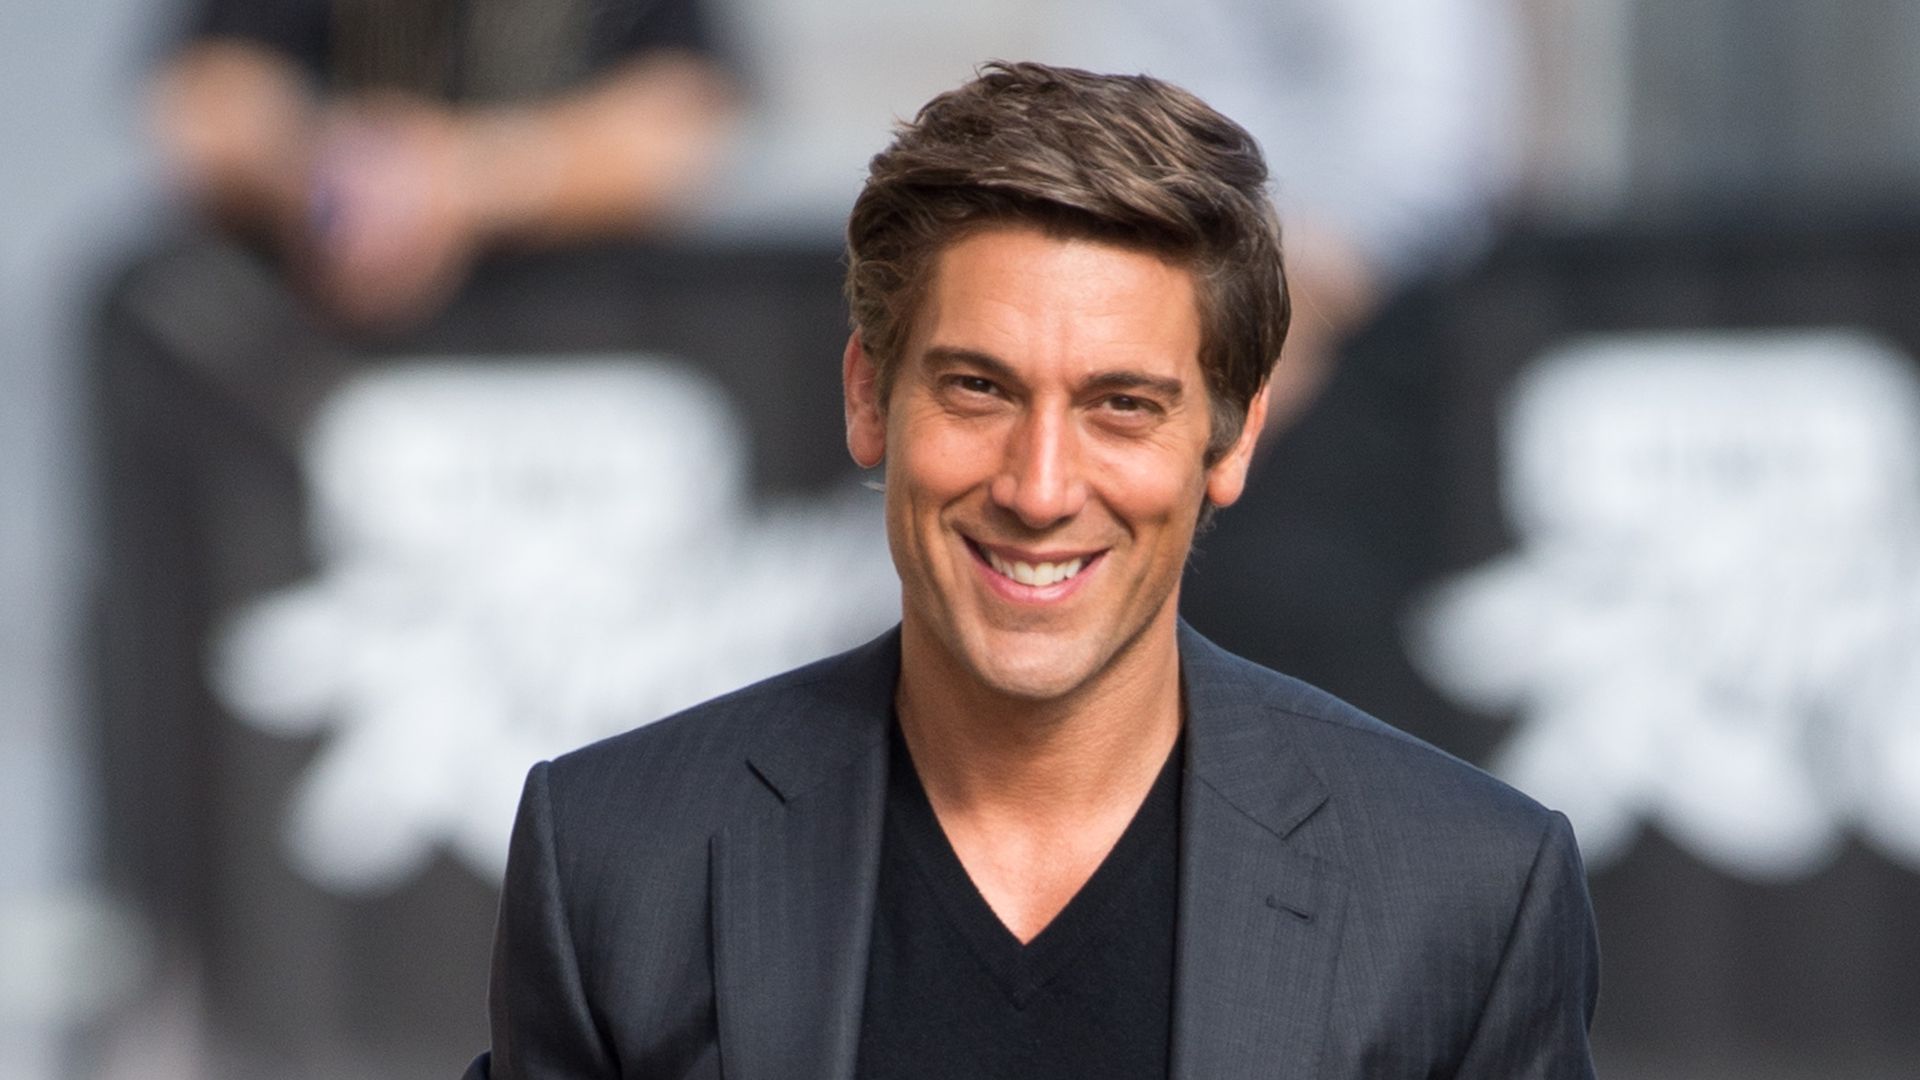 David Muir lets loose during holiday party with co-stars and rival ...